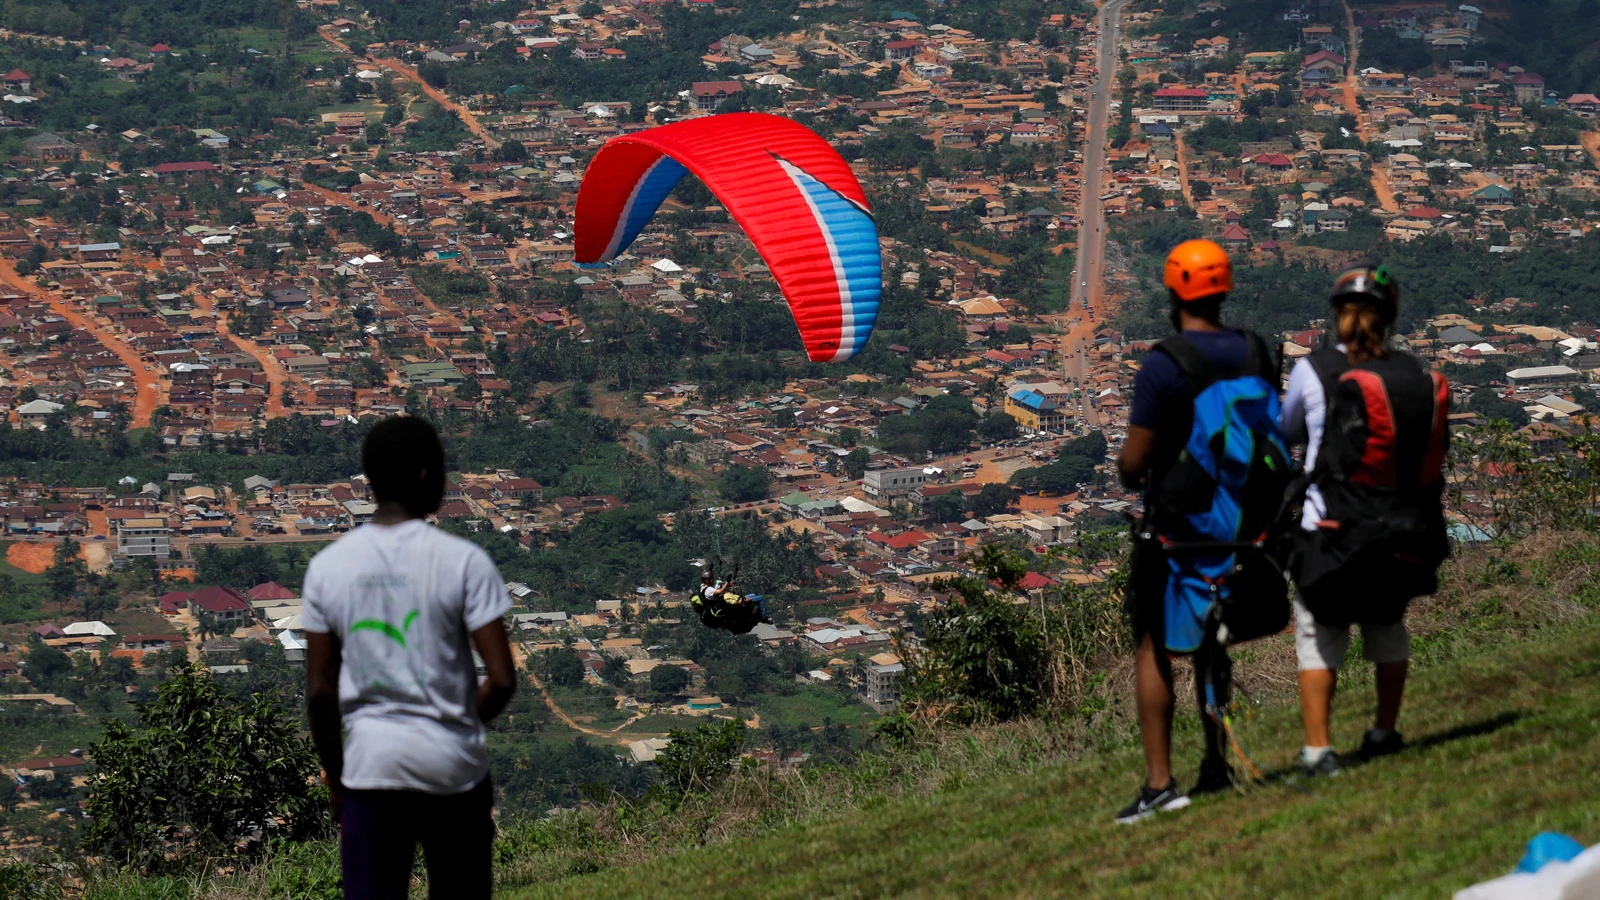 Paragliders flock to Ghana’s Kwahu and Atibie for Easter festival